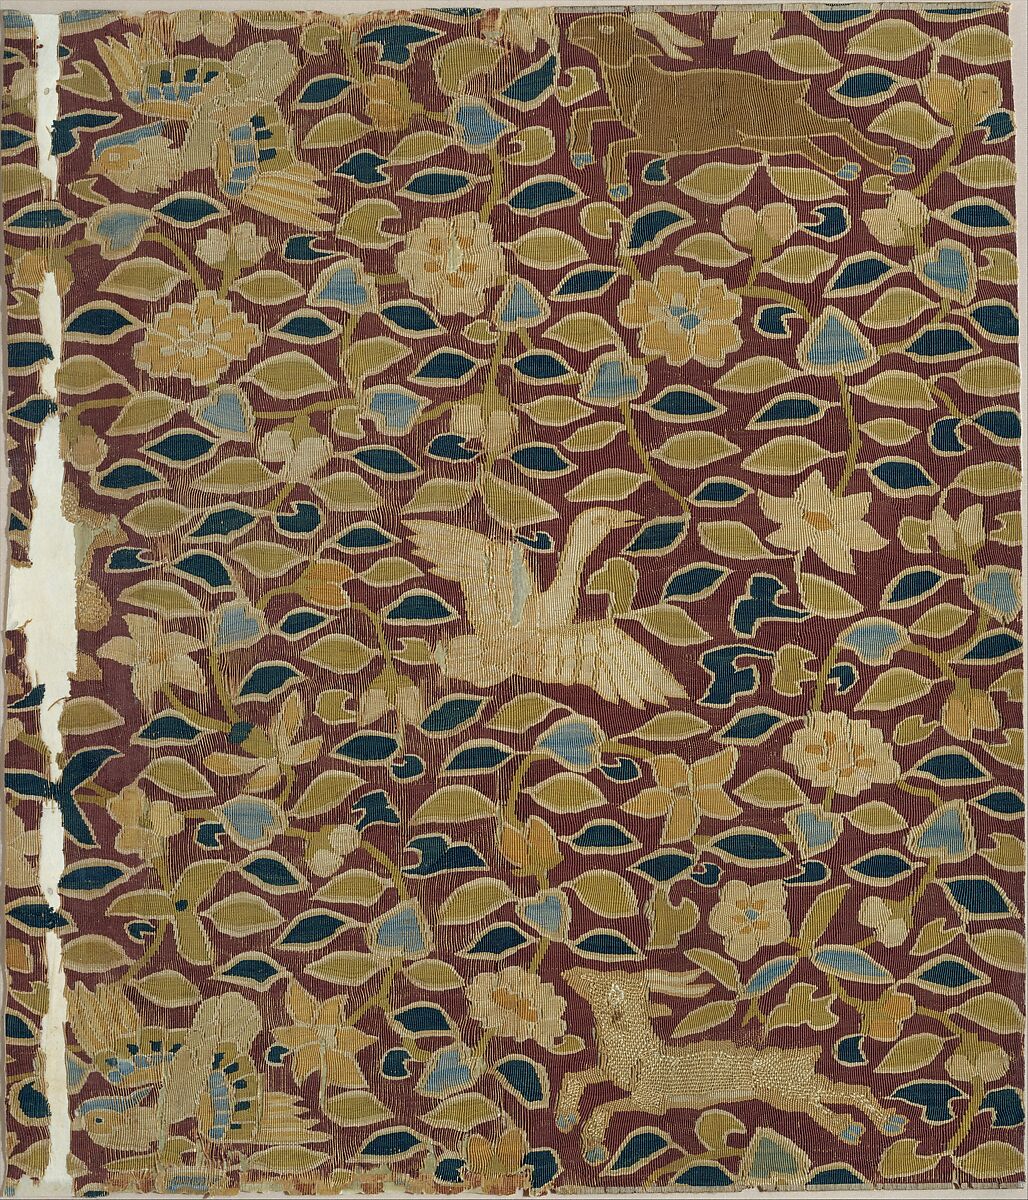 Scroll Cover with Animals, Birds, and Flowers, Silk tapestry (kesi), China